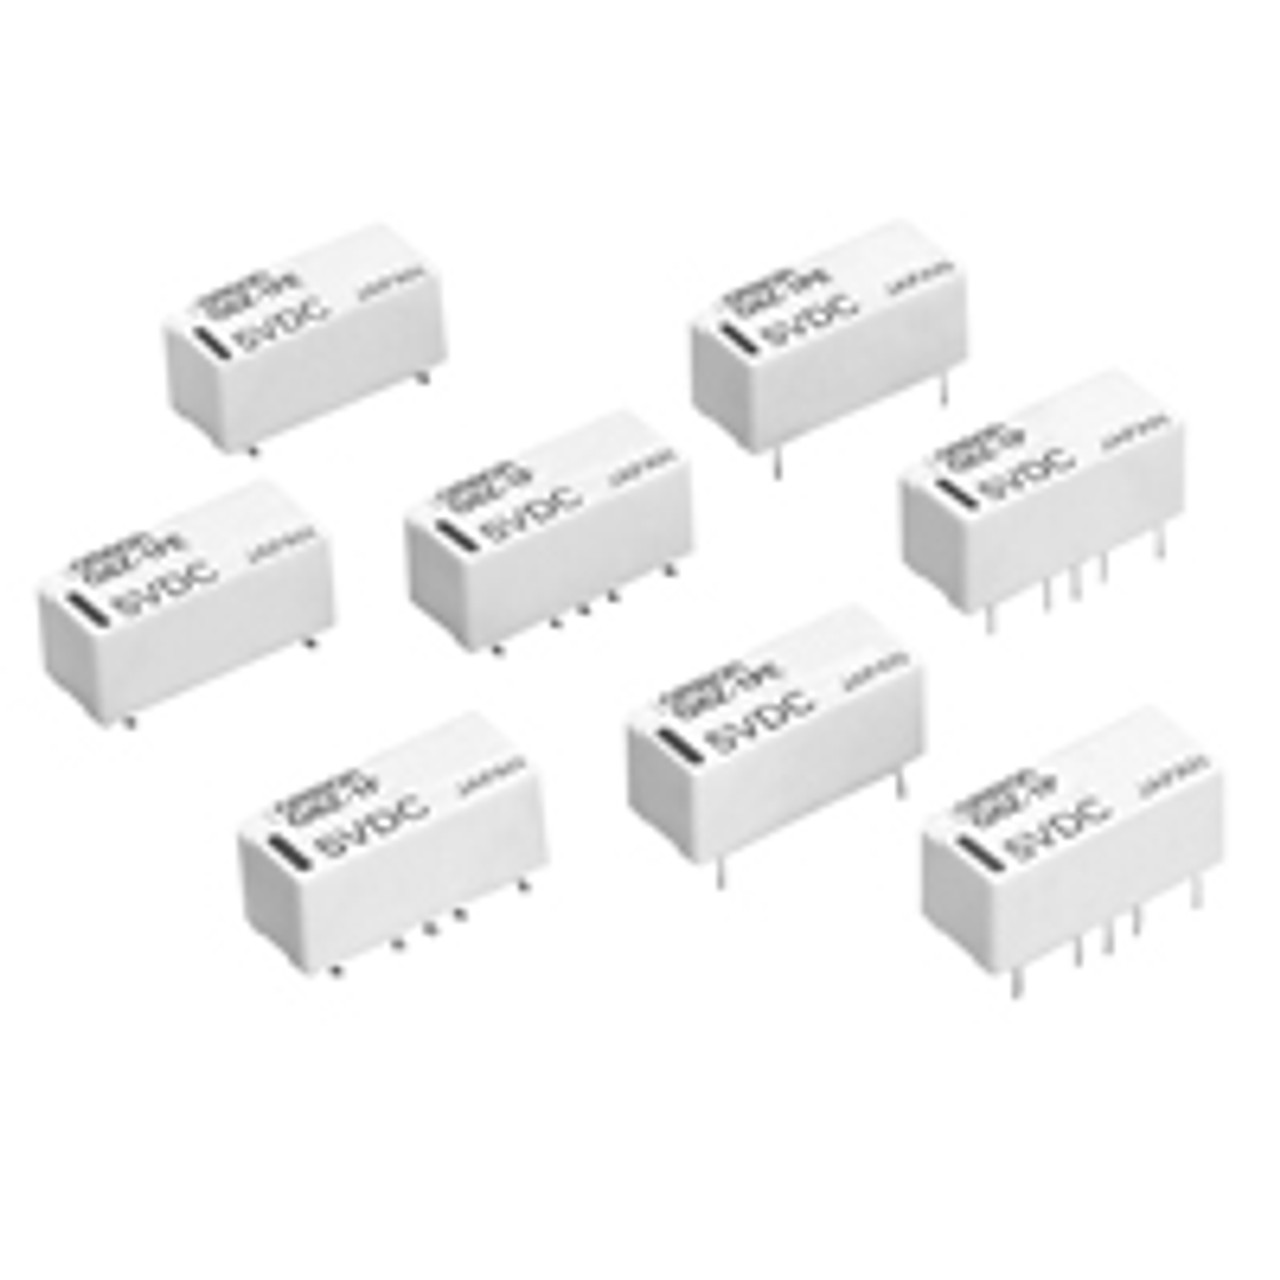 Omron G6ZK-1F-DC4.5 High Frequency Relays